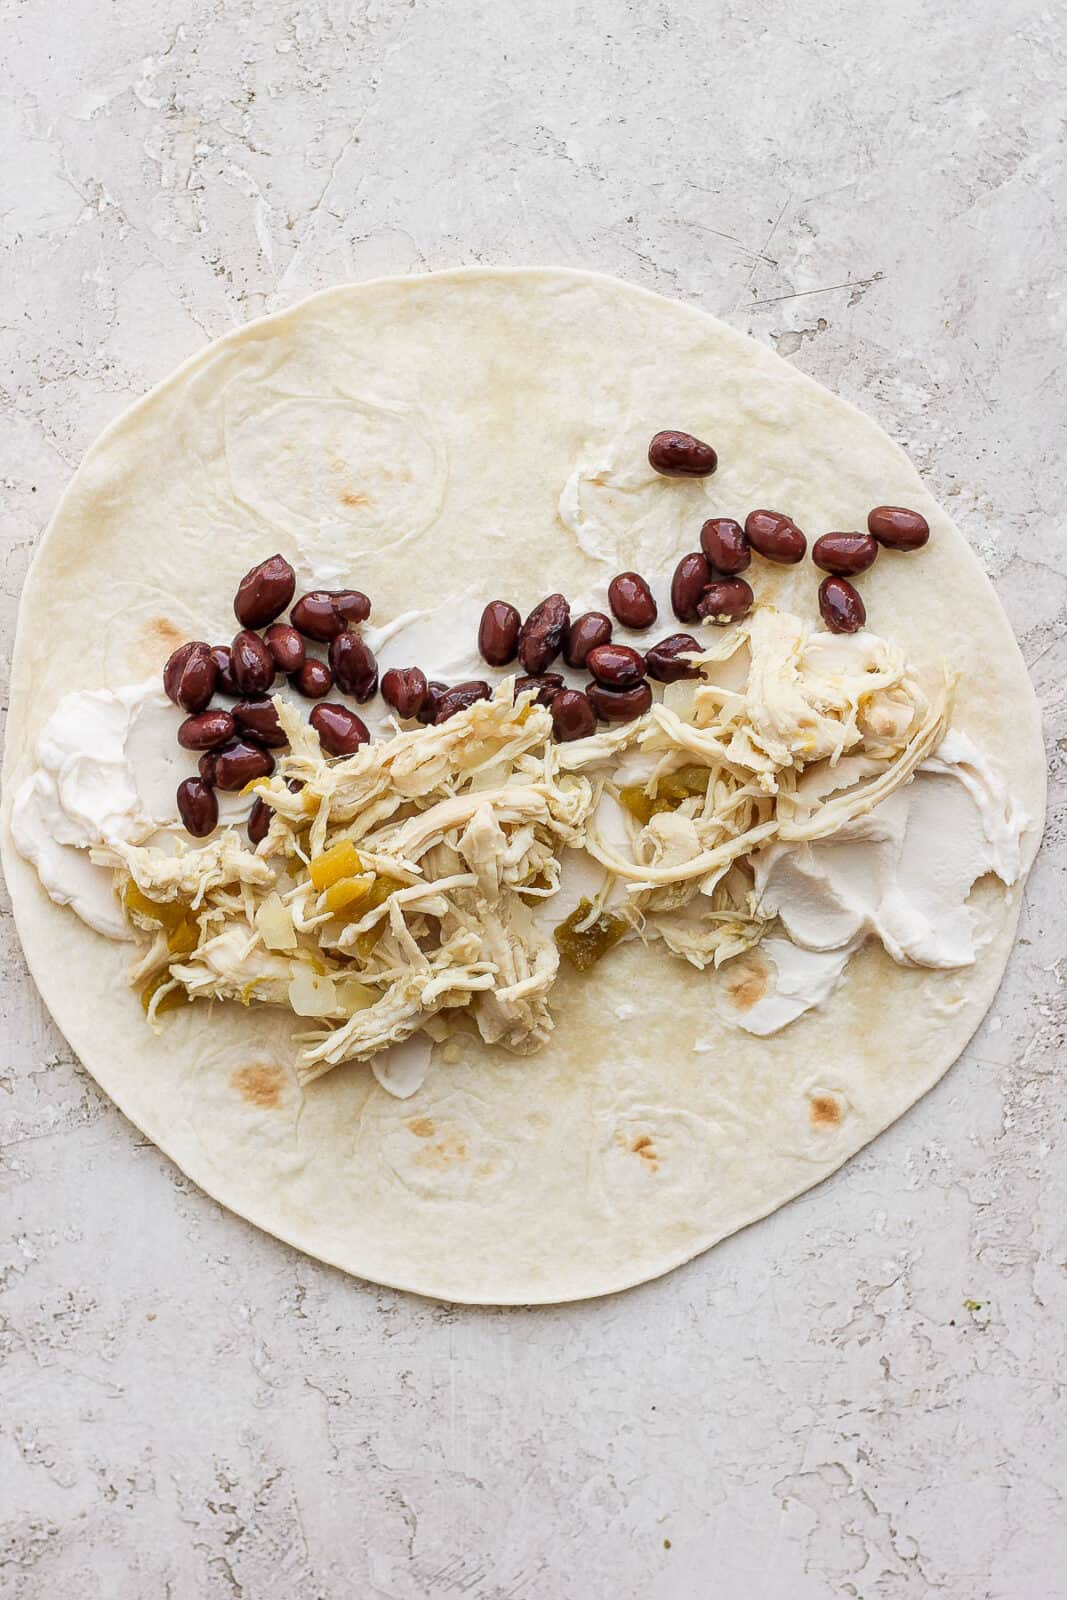 A tortilla with cream cheese, black beans, and chicken mixture.